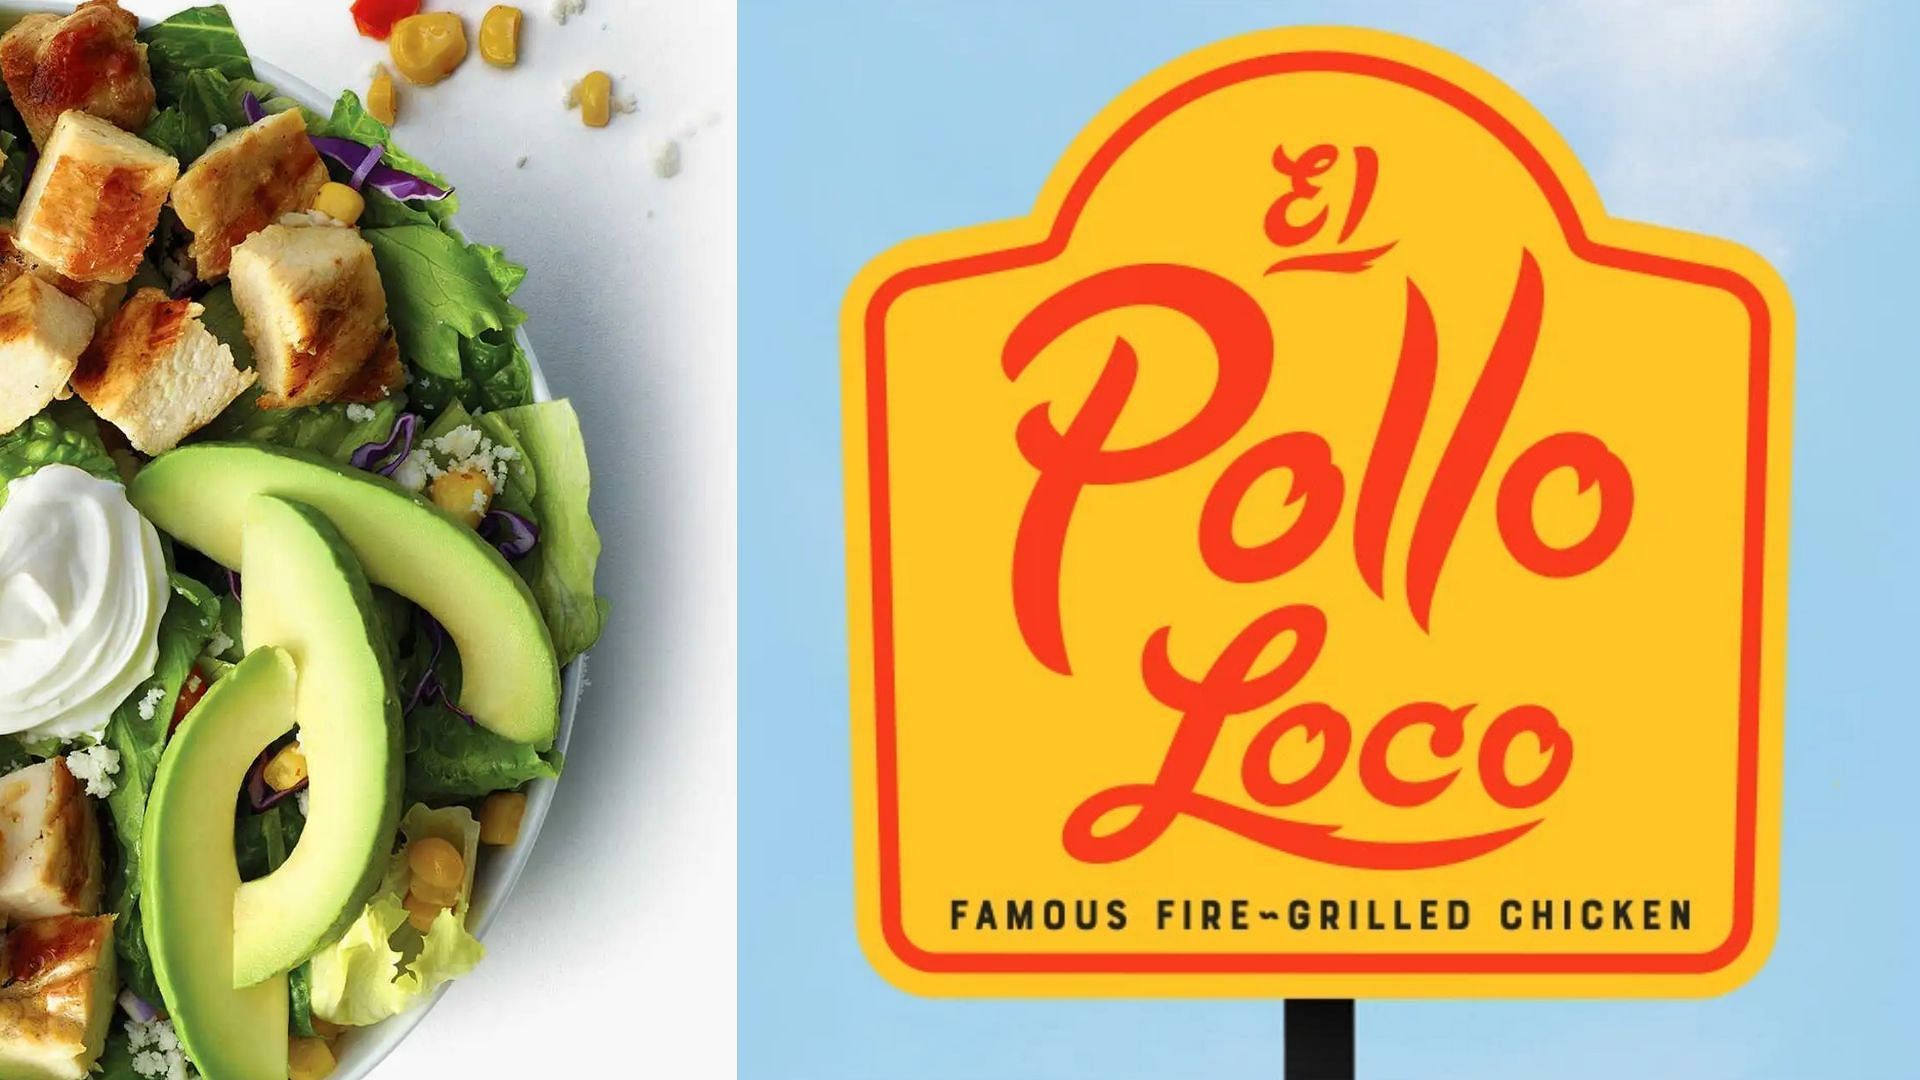 El Pollo Loco’s 12 Days of Pollo deal Prices, items, dates, and other